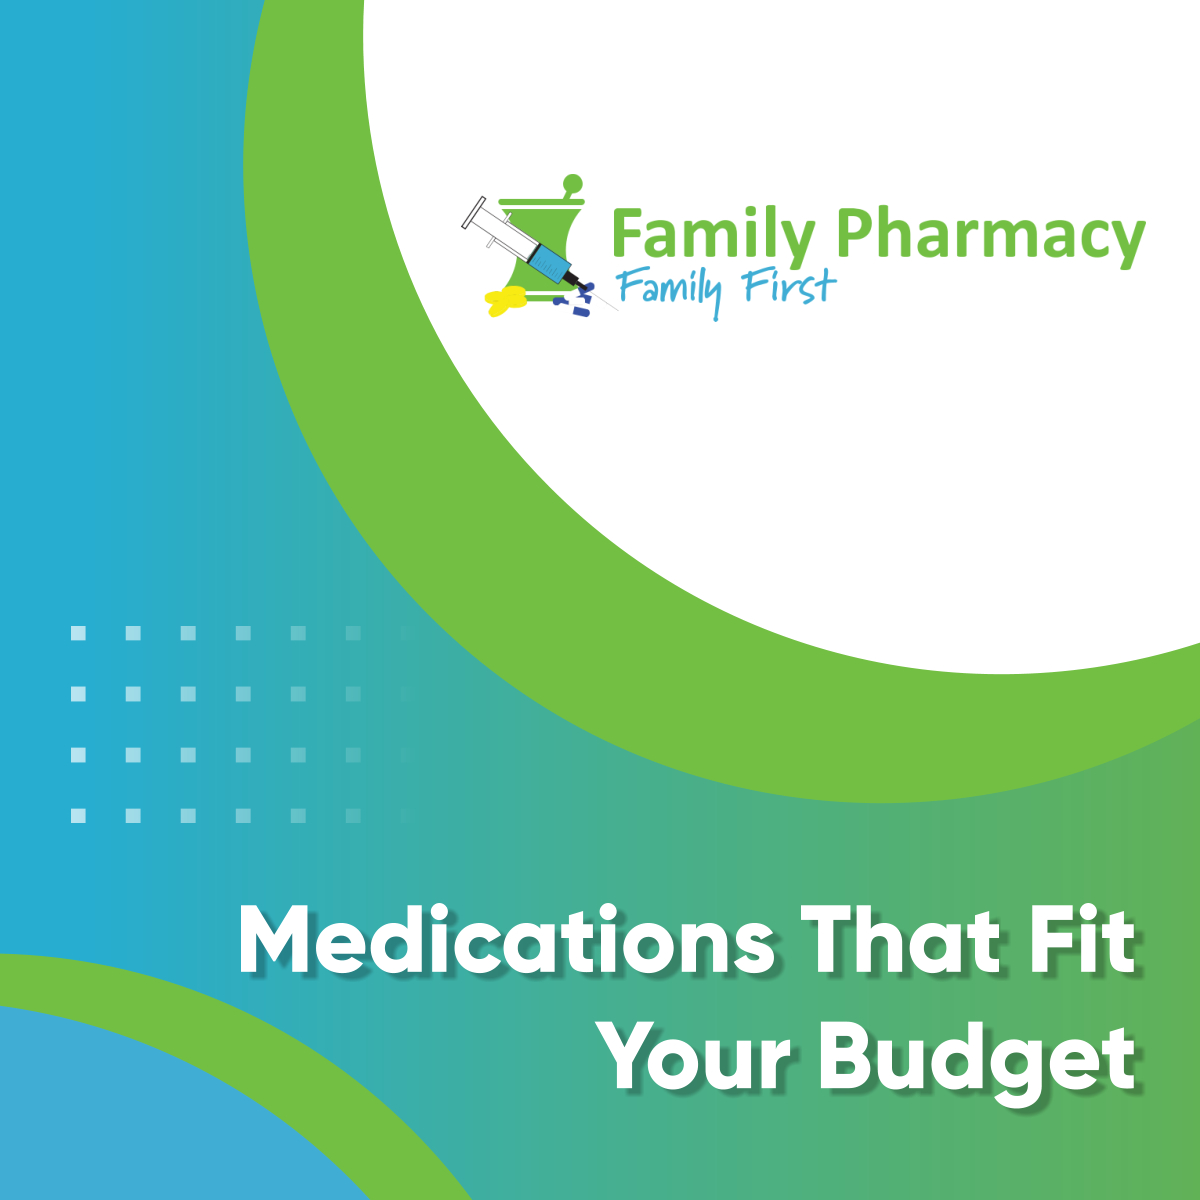 Generic drugs are significantly cheaper than branded medications. However, they can be just as effective. These drugs are the perfect options for patients who are on a budget. 

#EastportME #Medications #PharmacyServices